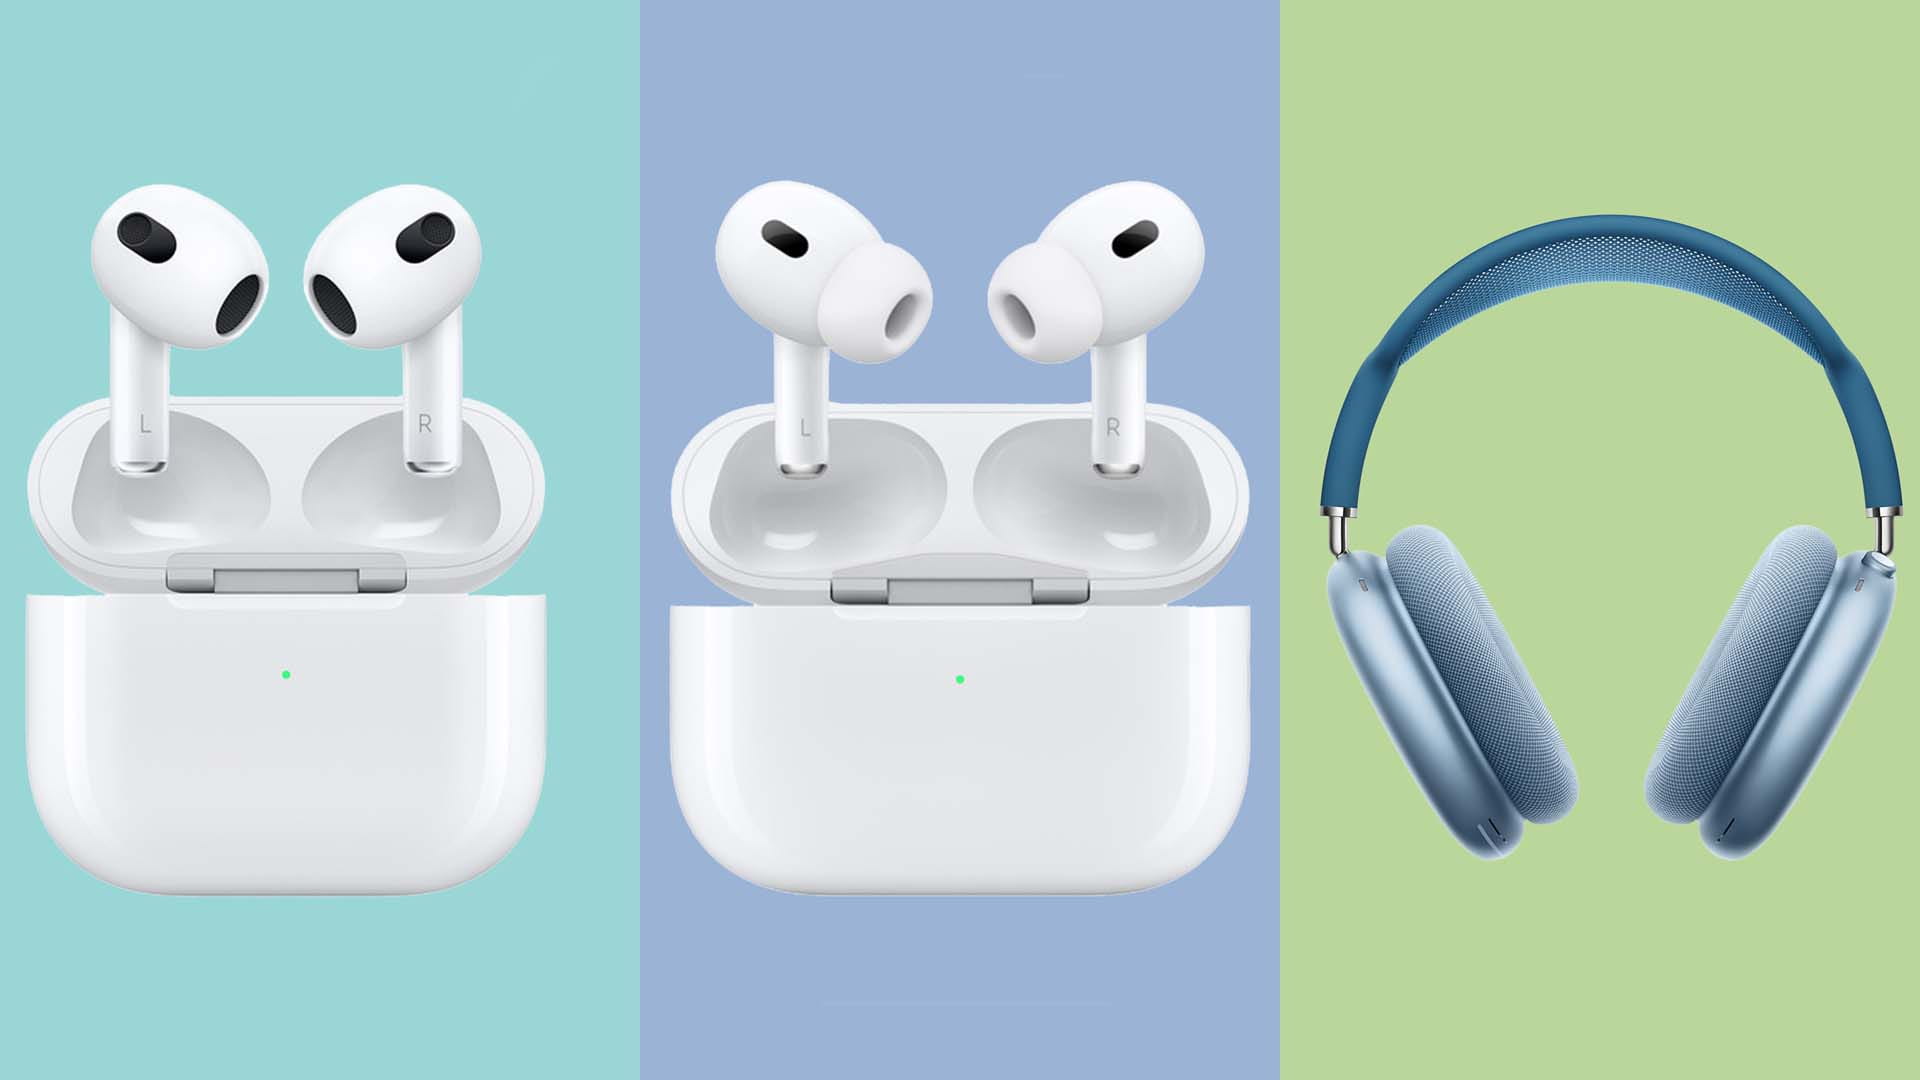 Two examples of Apple's Airpods and an image of headphones